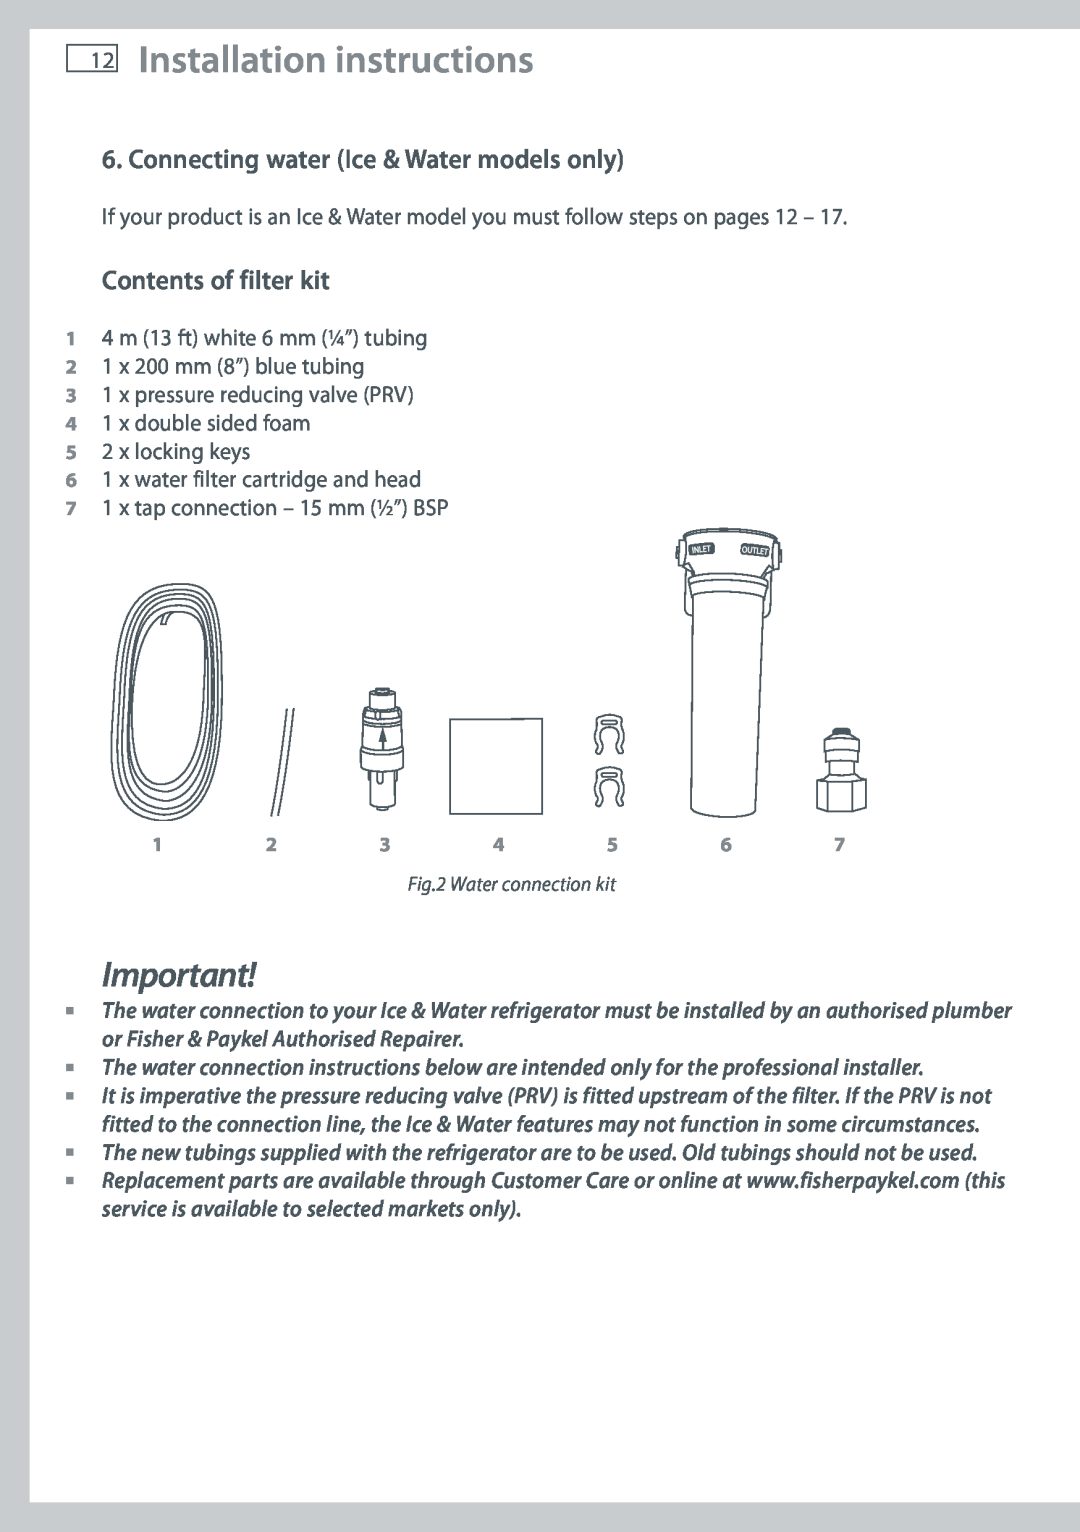 Fisher & Paykel RF522W, RF522A Installation instructions, Connecting water Ice & Water models only, Contents of filter kit 